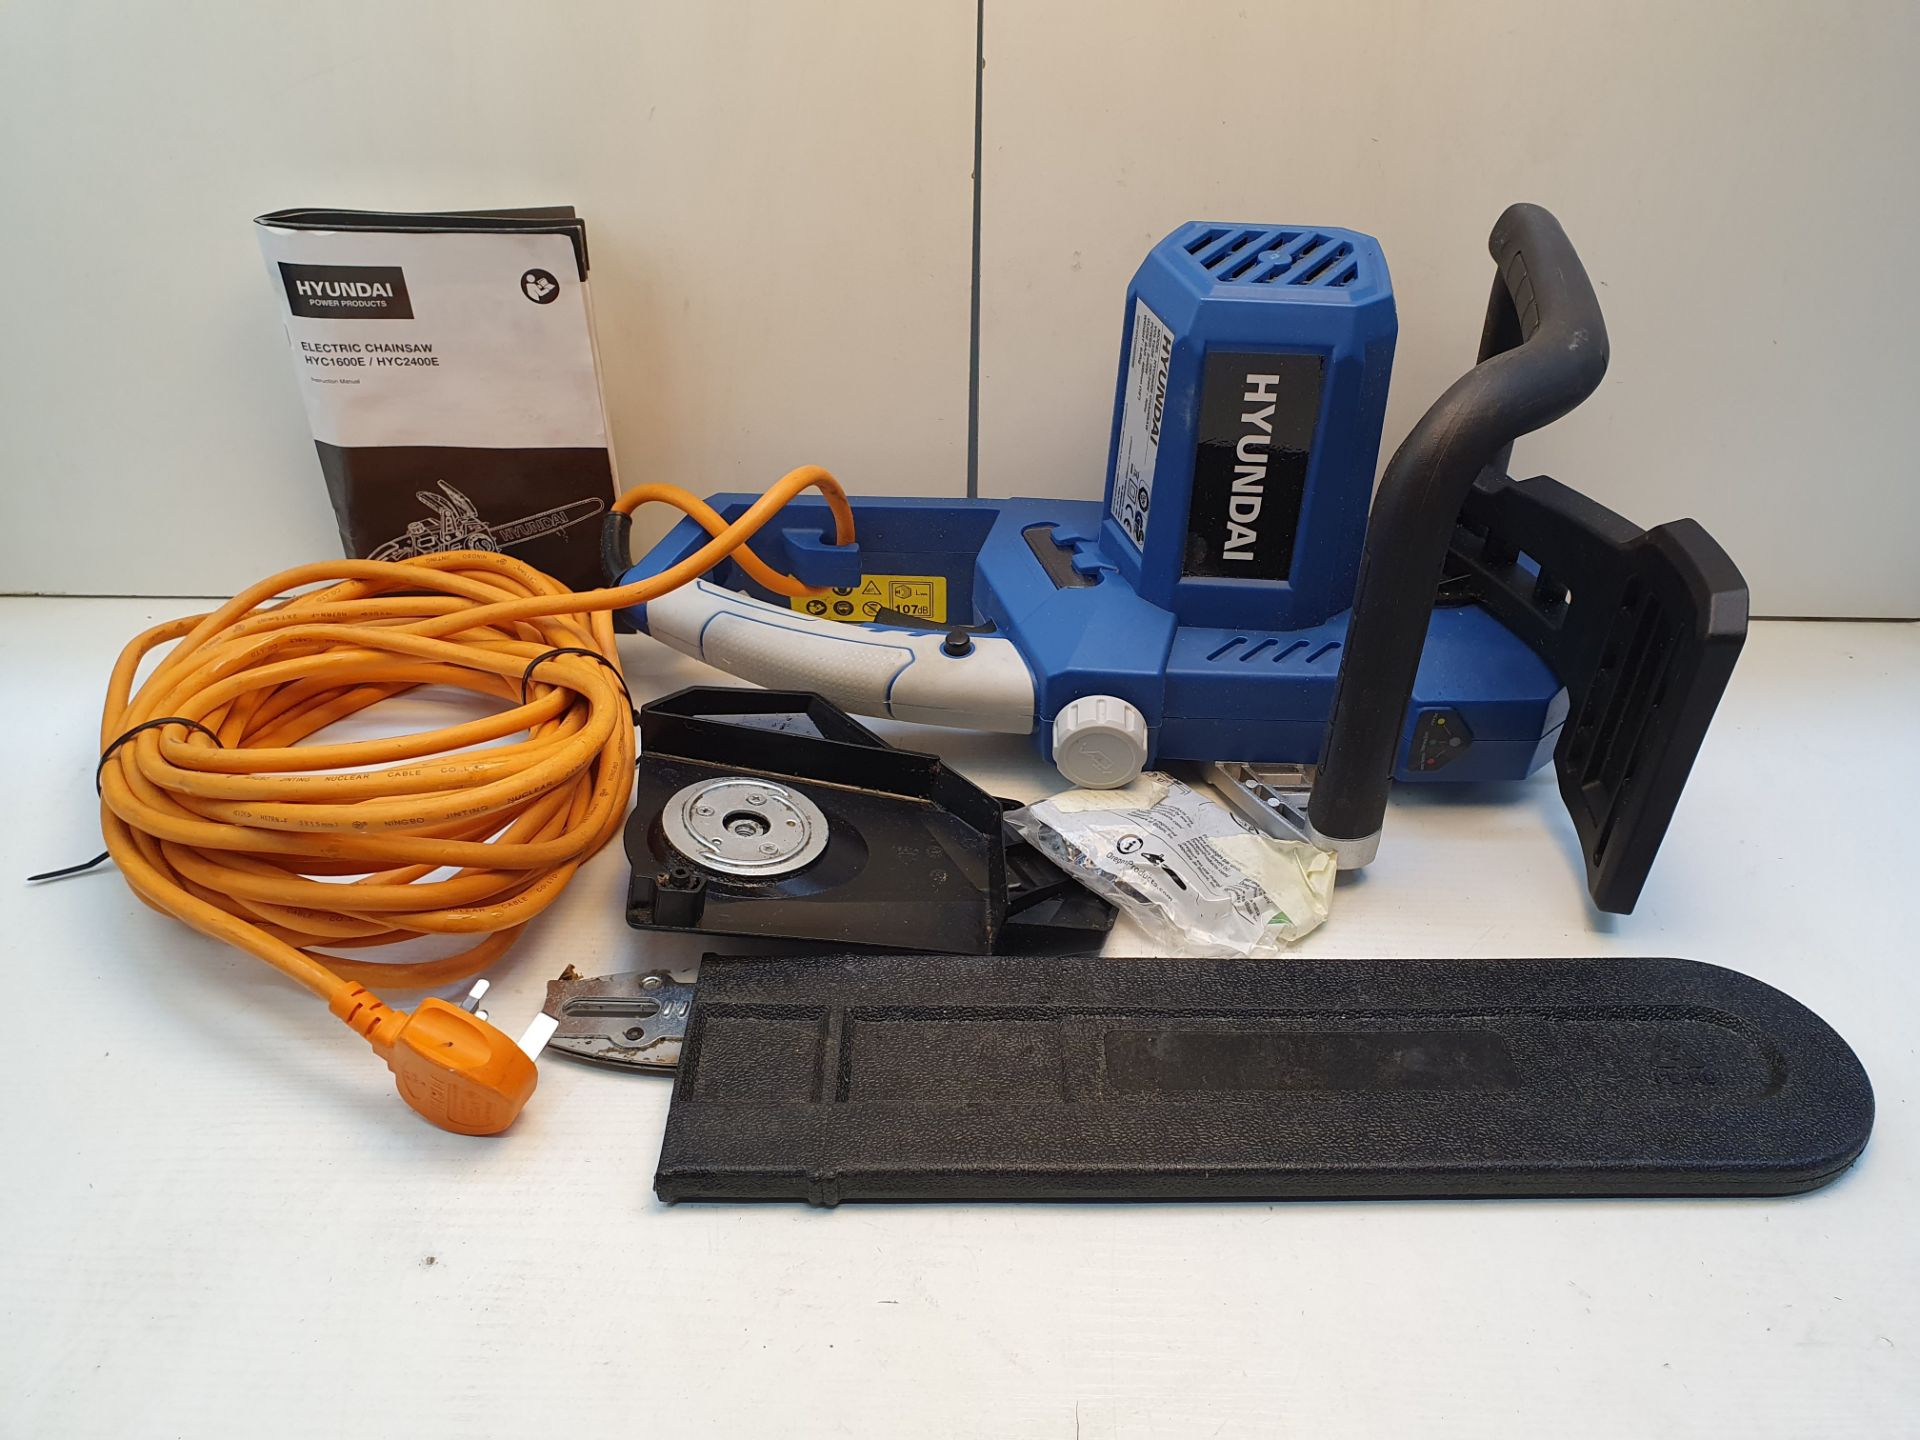 UNBOXED HYUNDAI HEDGETRIMMER RRP £139.99Condition ReportAppraisal Available on Request- All Items